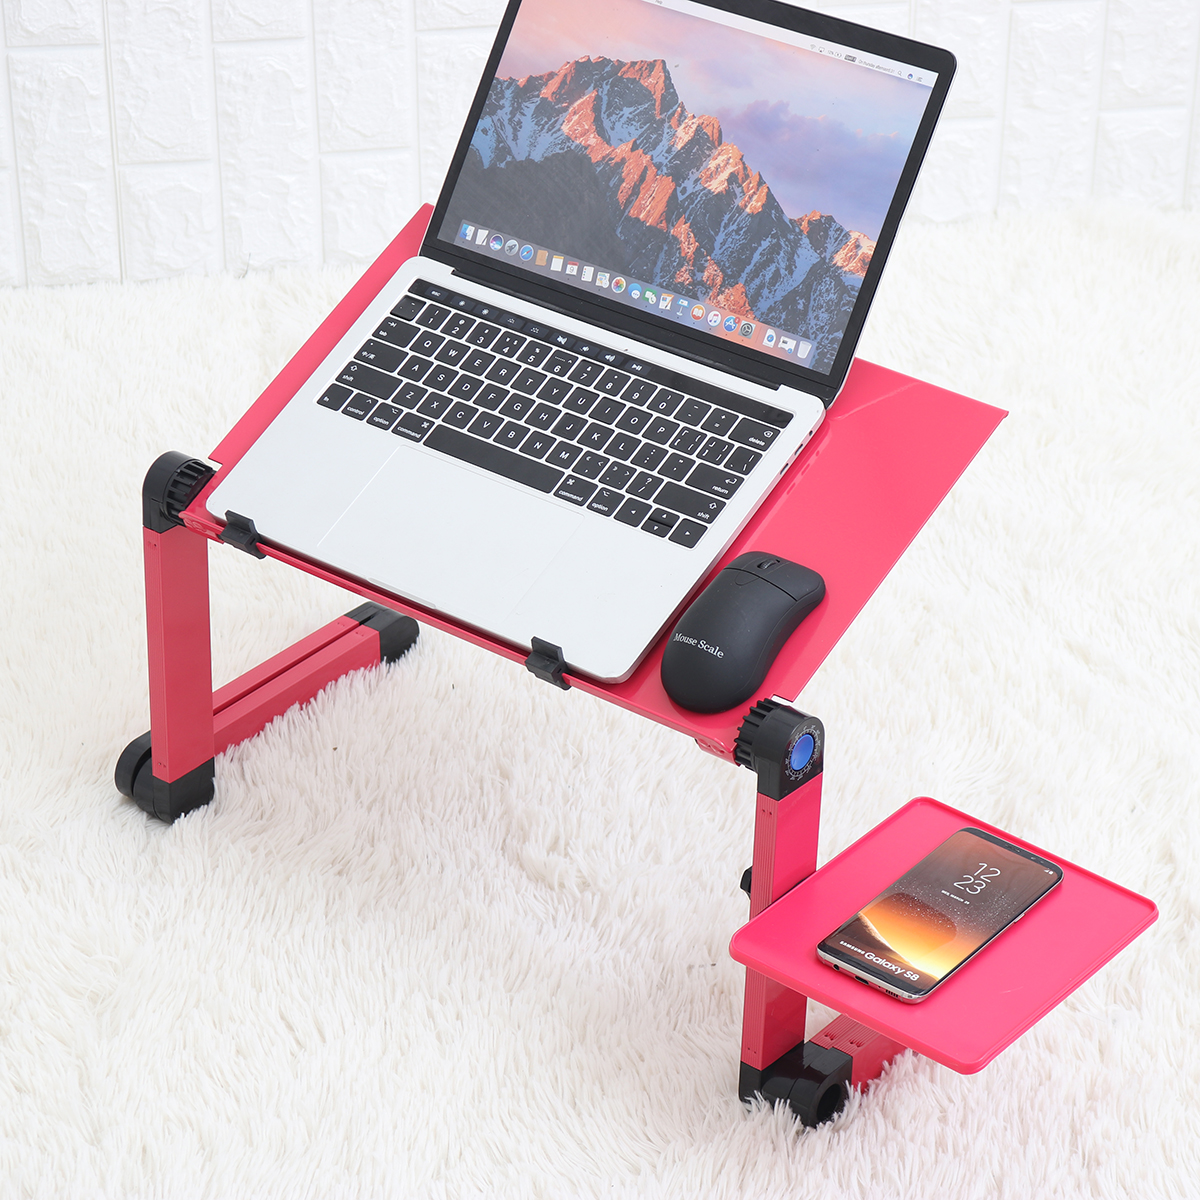 Laptop-Desk-Aluminum-Alloy-Folding-Computer-Notebook-Desk-Bed-Laptop-Table-with-Cooling-Stand-and-Mo-1746373-9